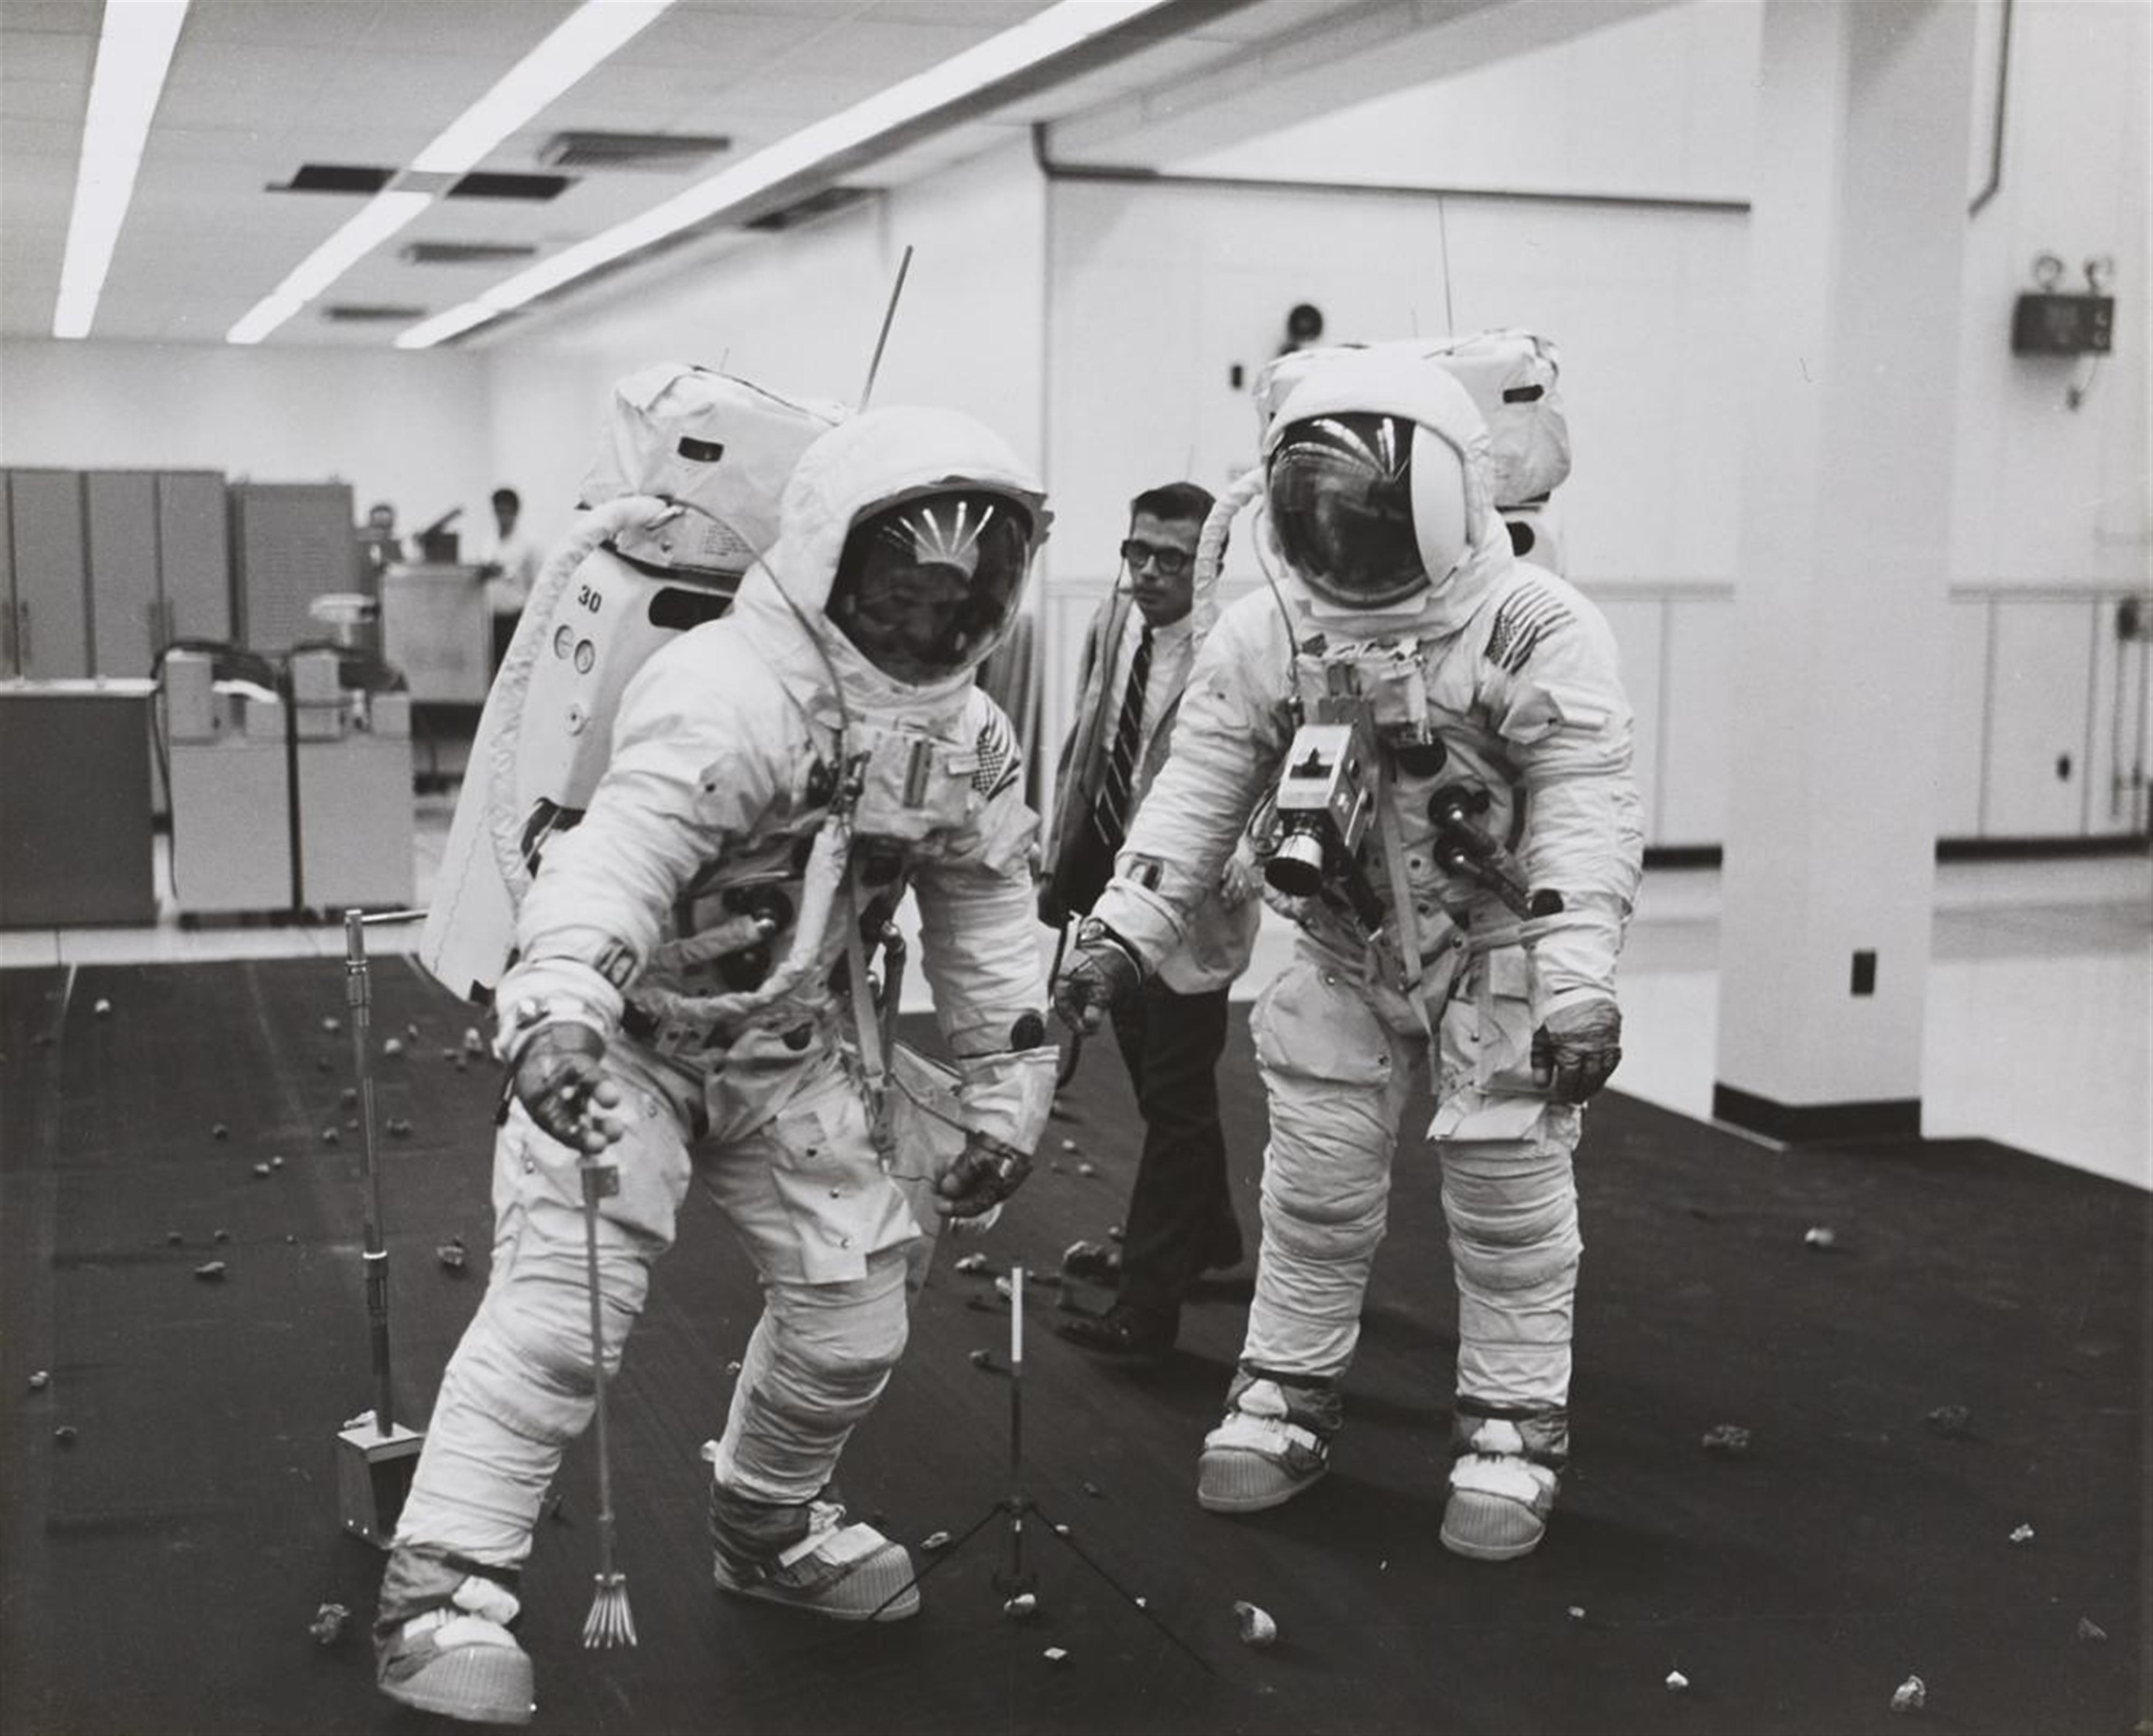 NASA - Apollo 11 crew members simulating their activities on the lunar surface - image-1